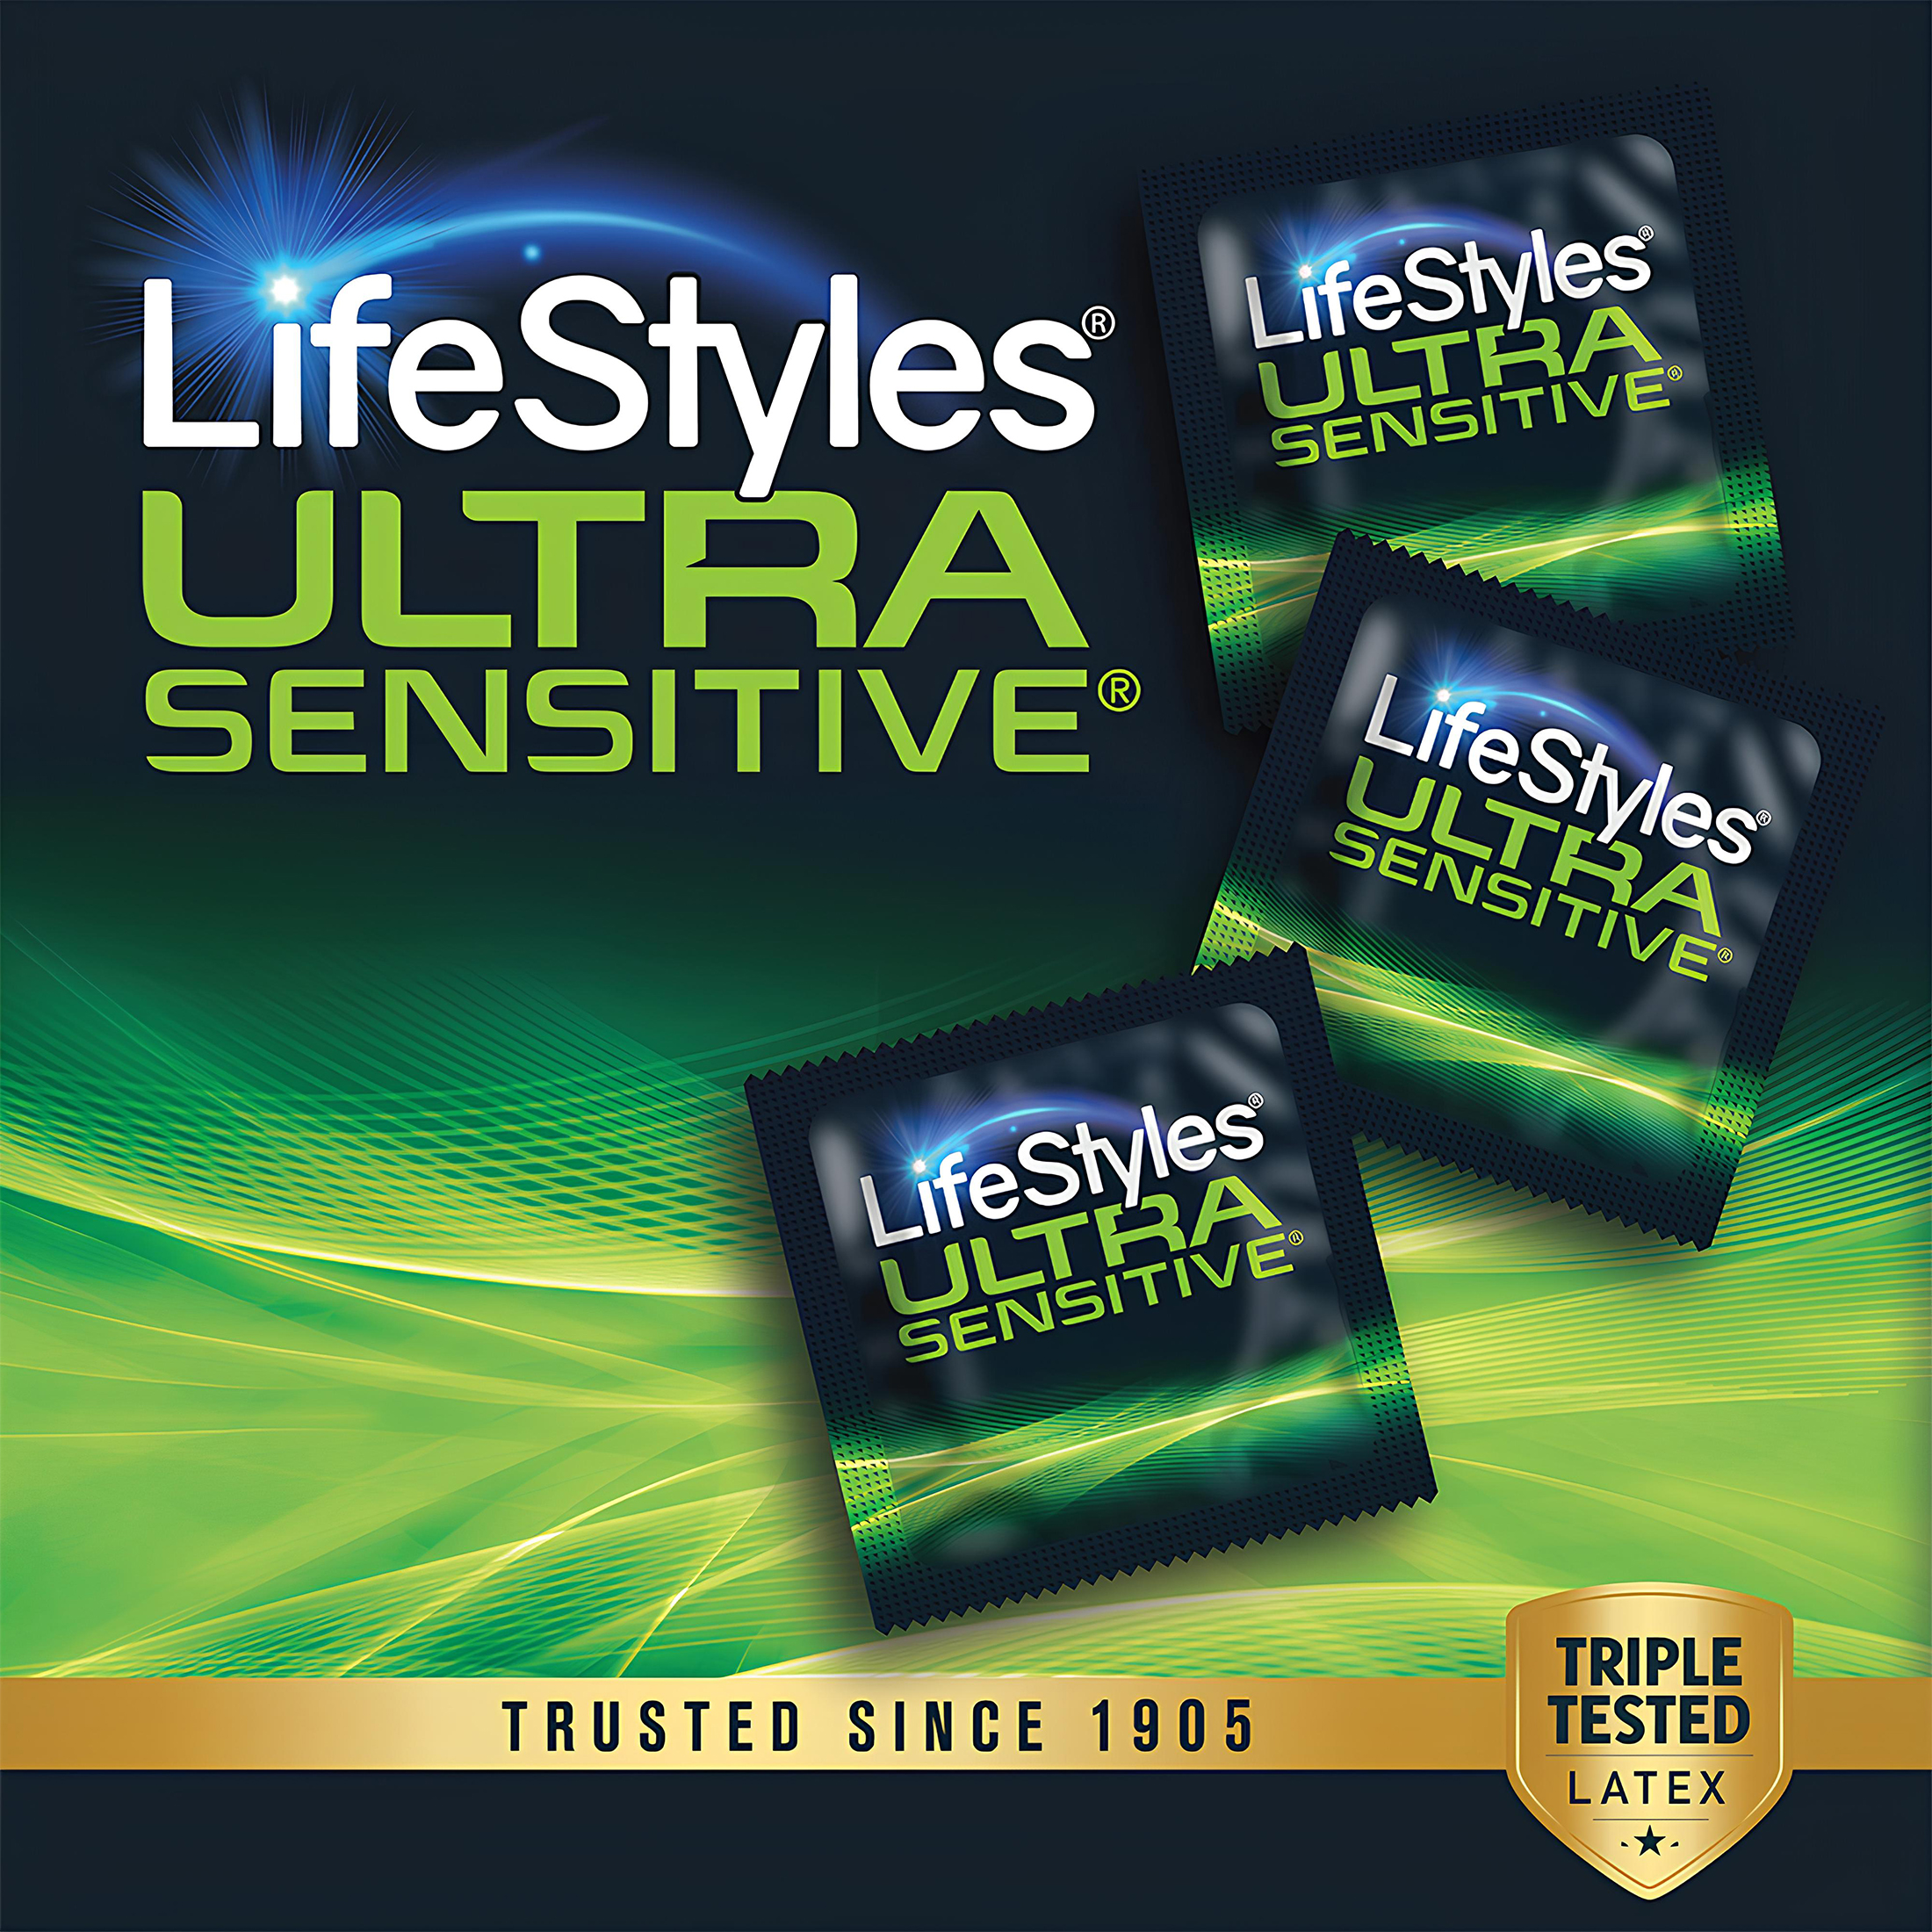 LifeStyles Ultra-Sensitive Lubricated Latex Condoms, 40 Count - image 4 of 7